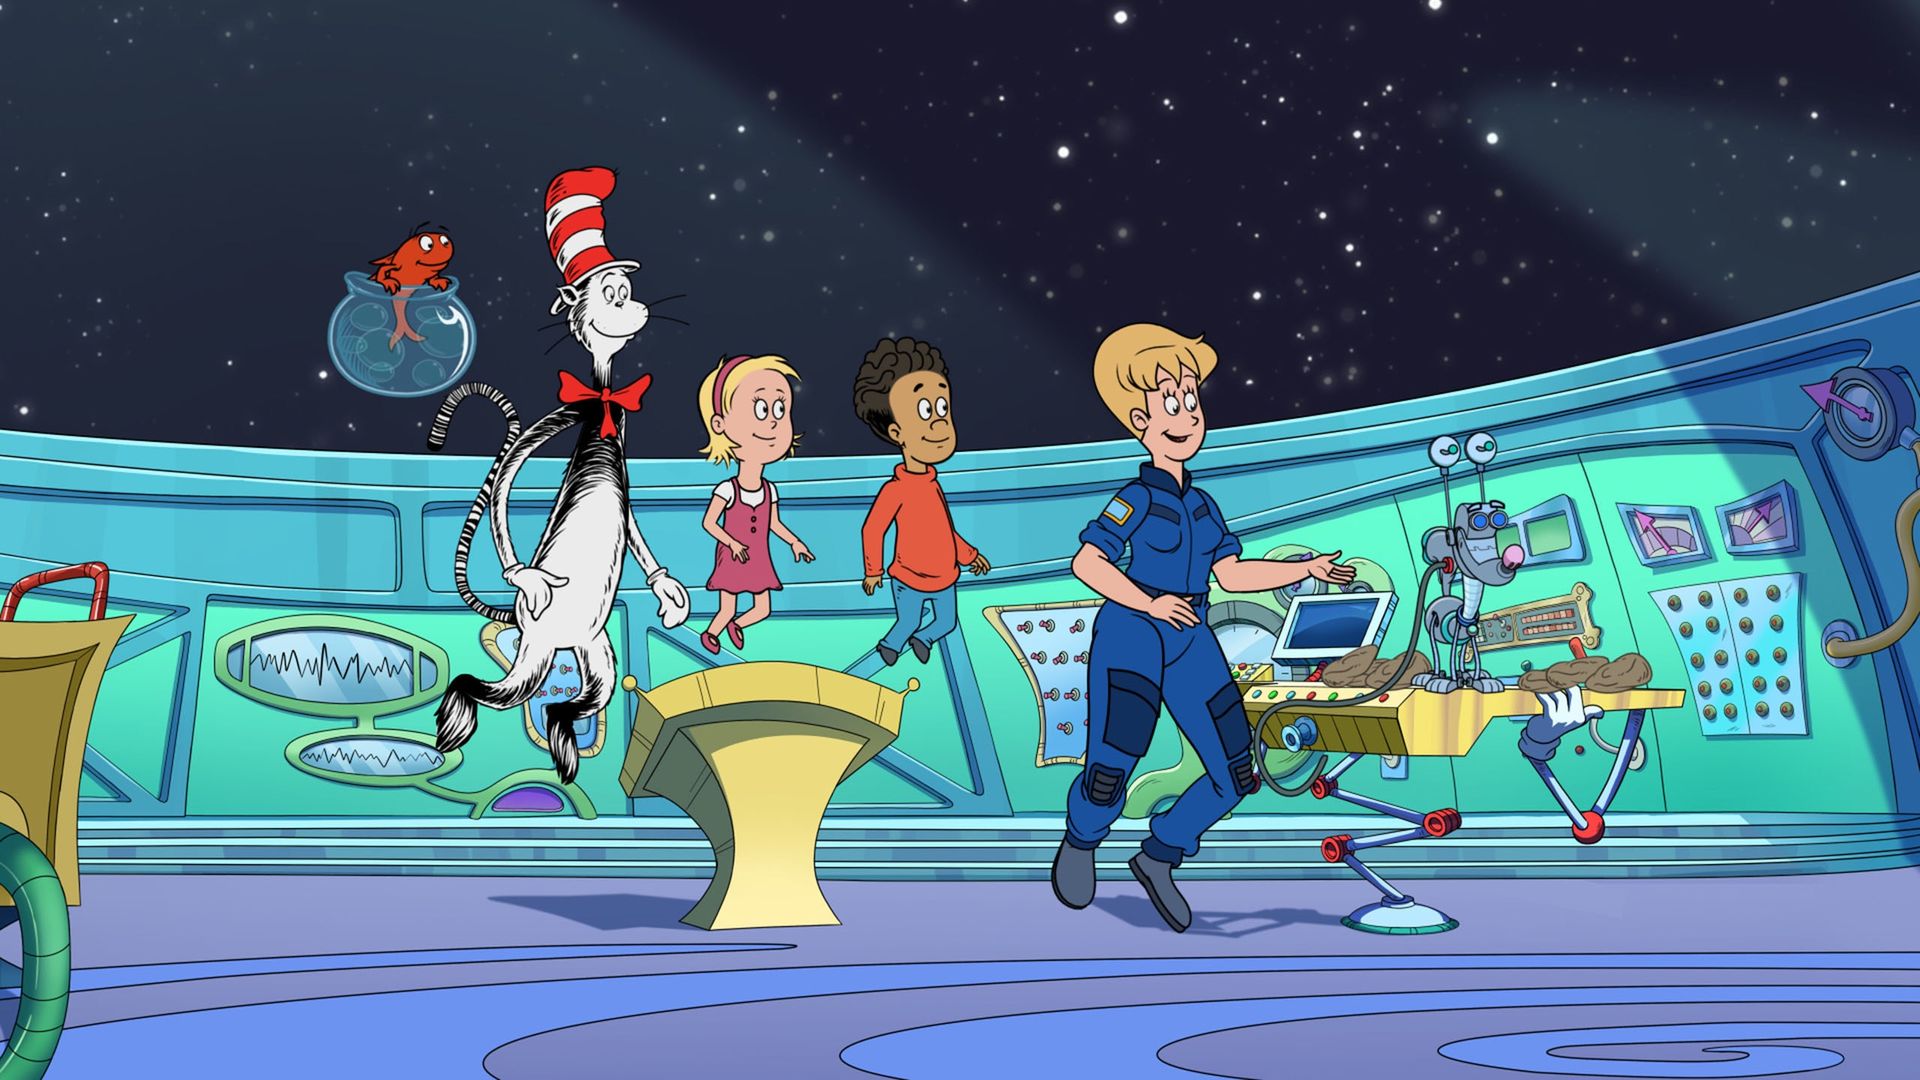 The Cat in the Hat Knows a Lot About Space! Backdrop